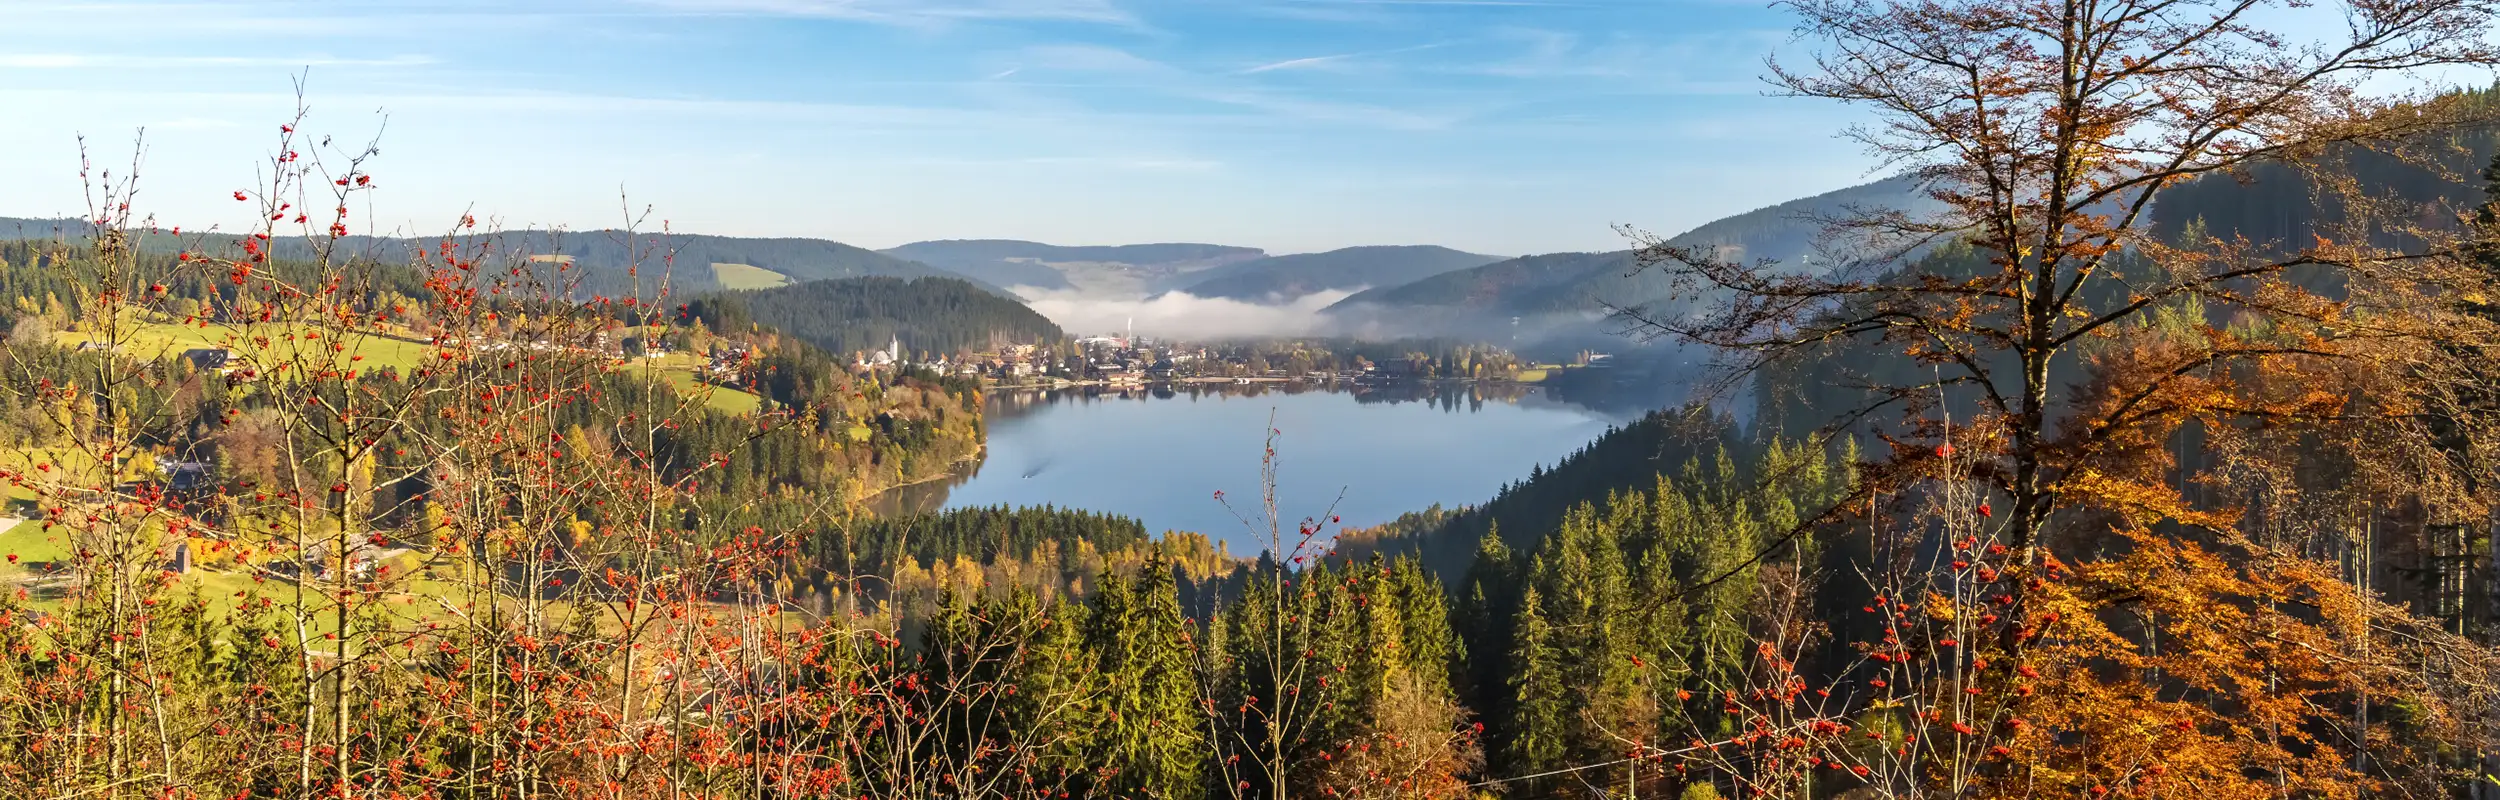 Titisee im Herbst